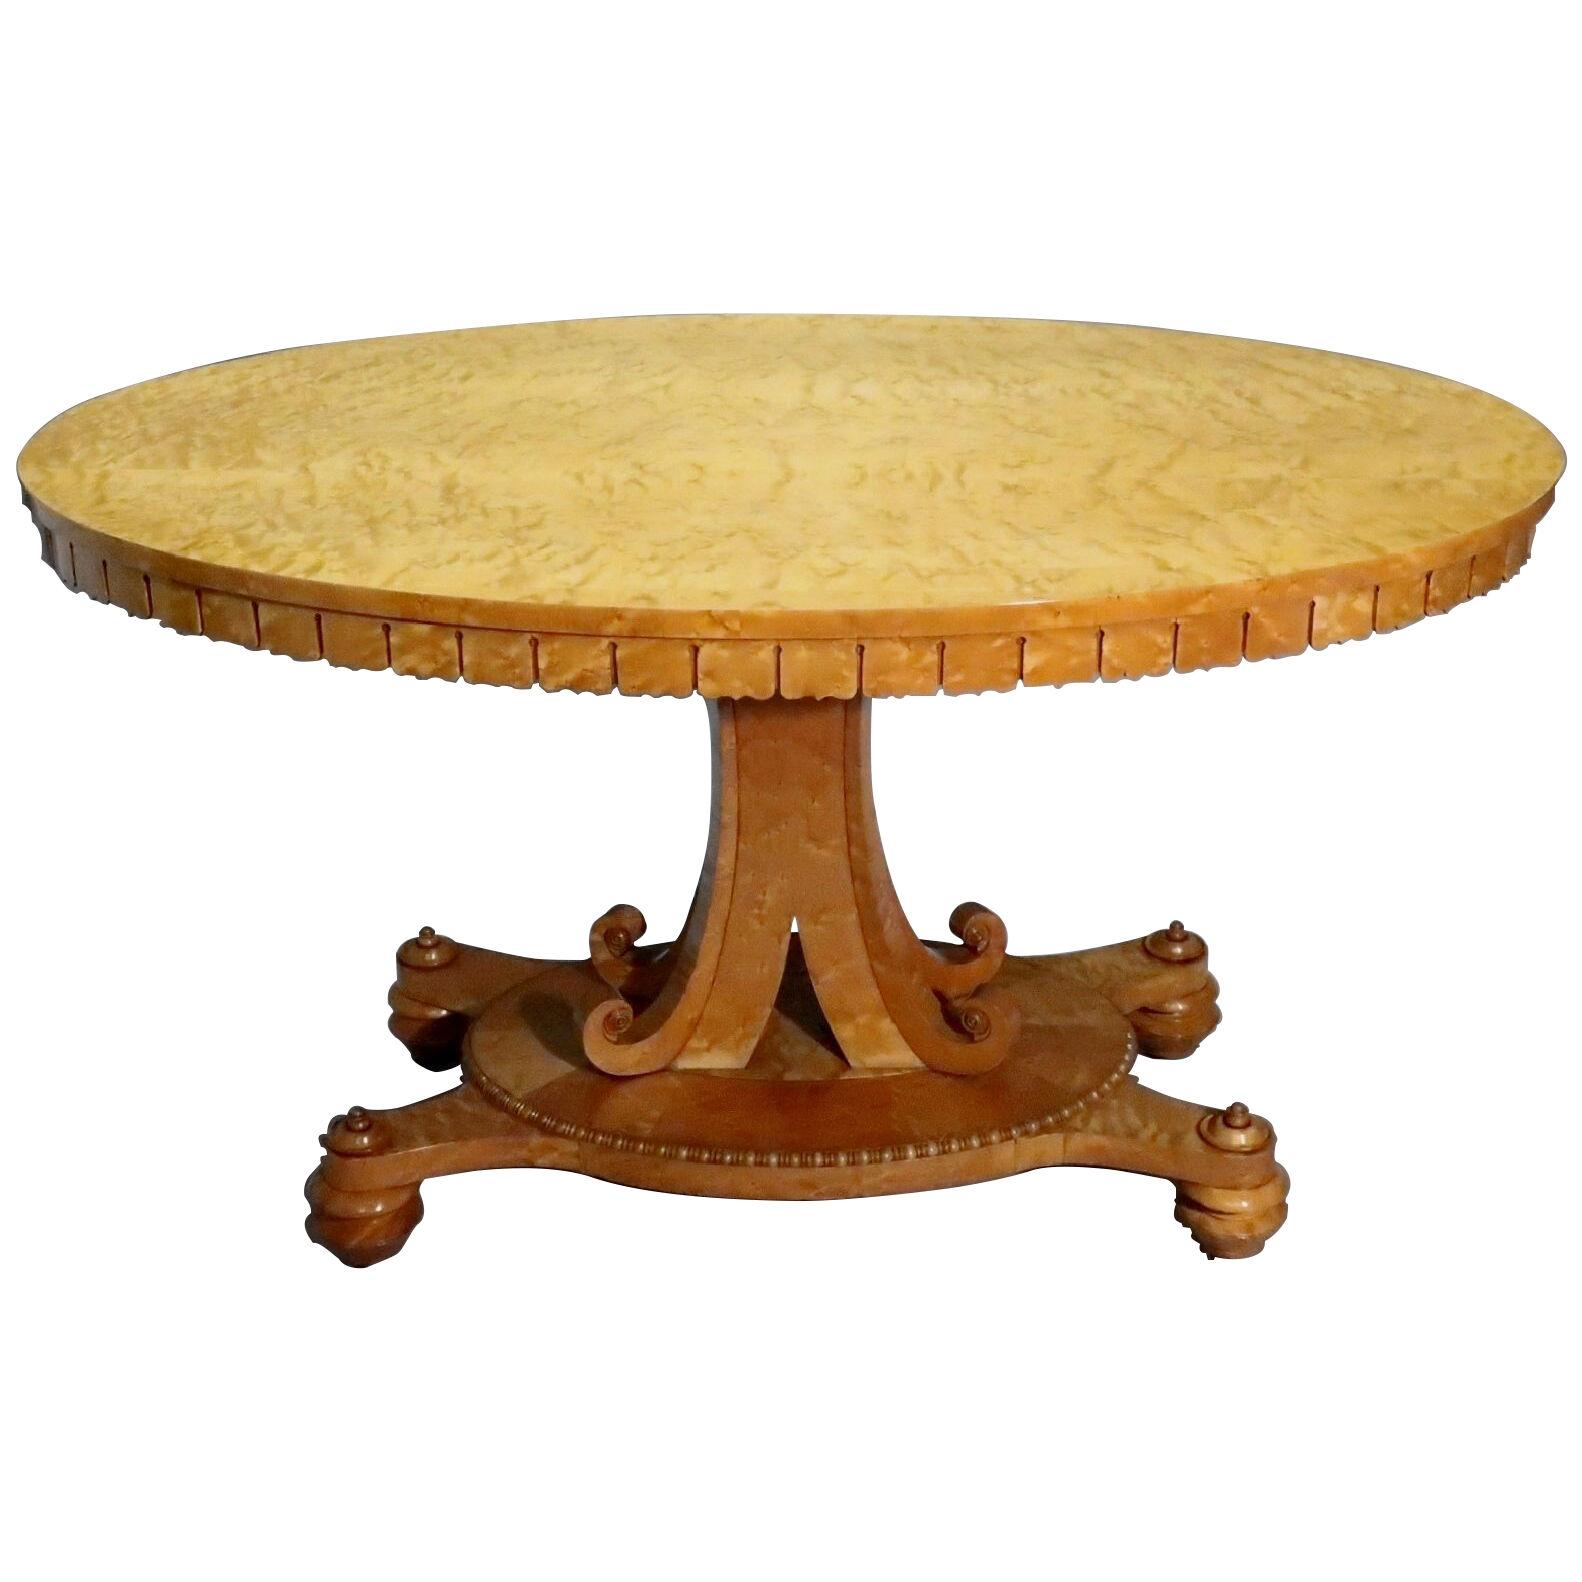 Late Regency Birds Eye Maple Centre Table Attributed to Gillows